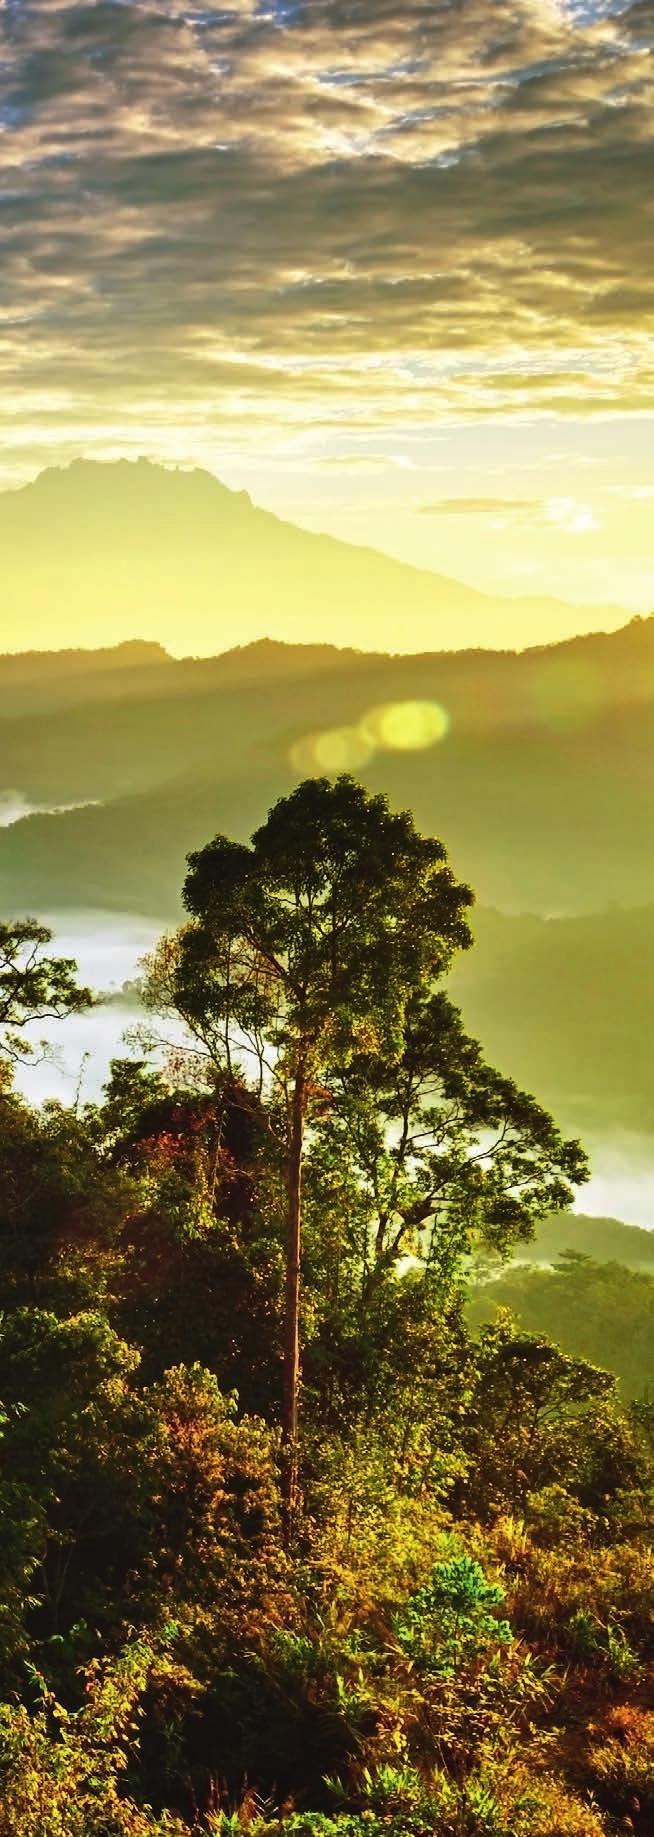 TR AVEL LAND Borneo has long been a must-visit destination for travellers in search of adventure.